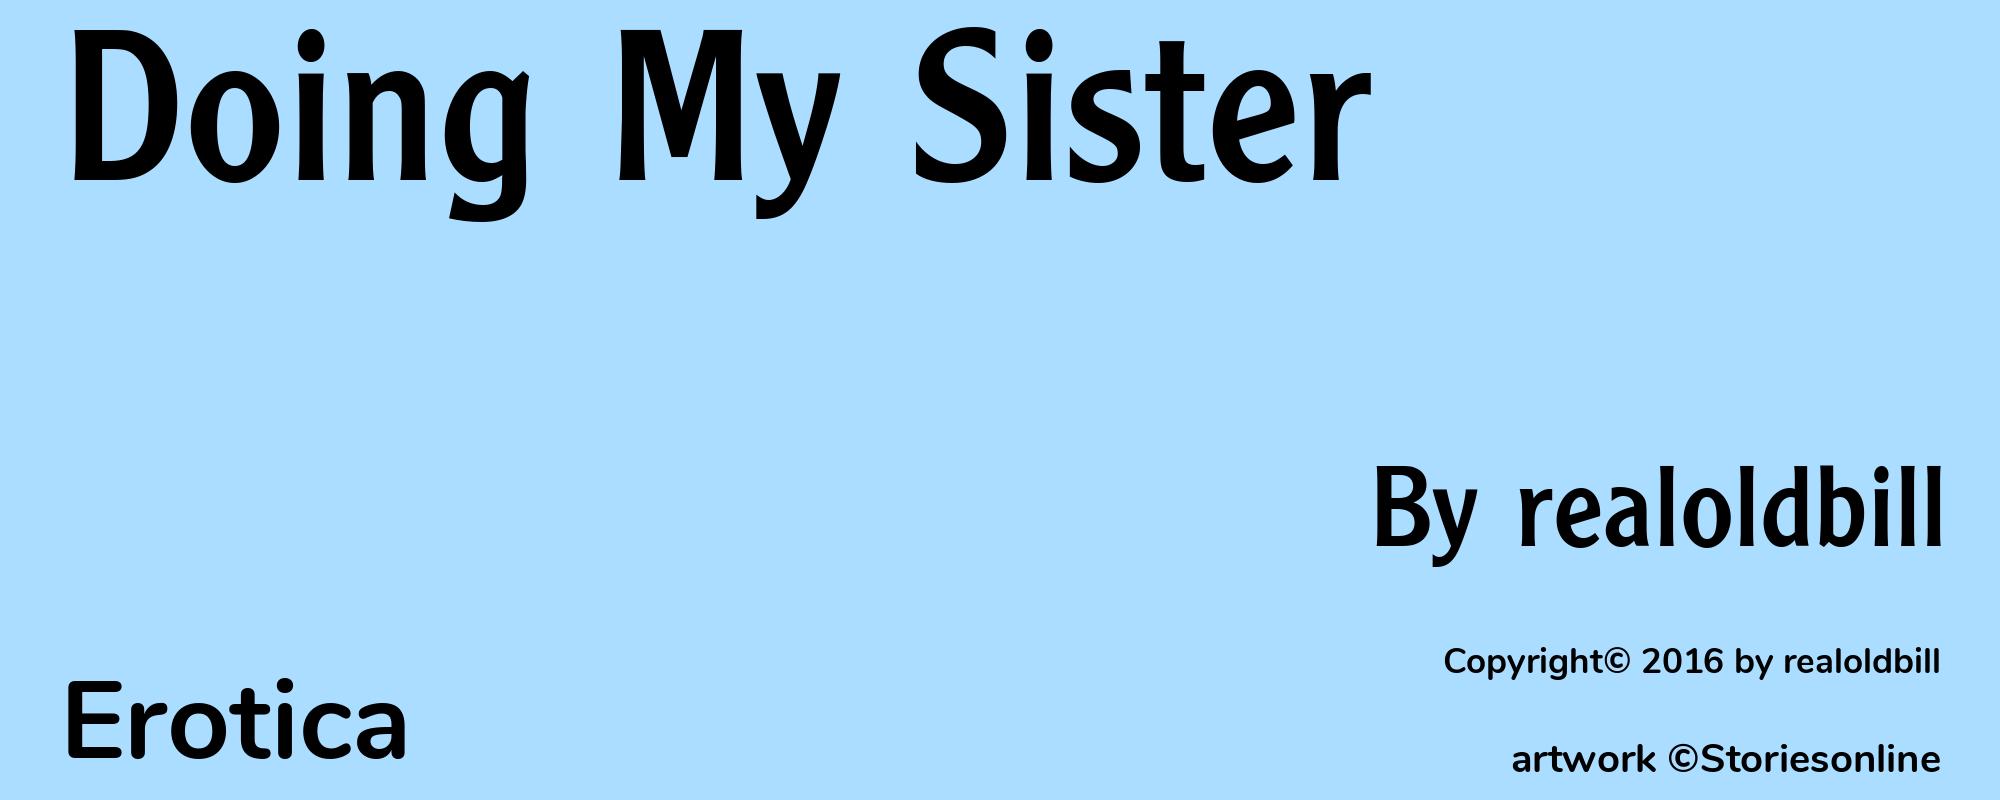 Doing My Sister - Cover